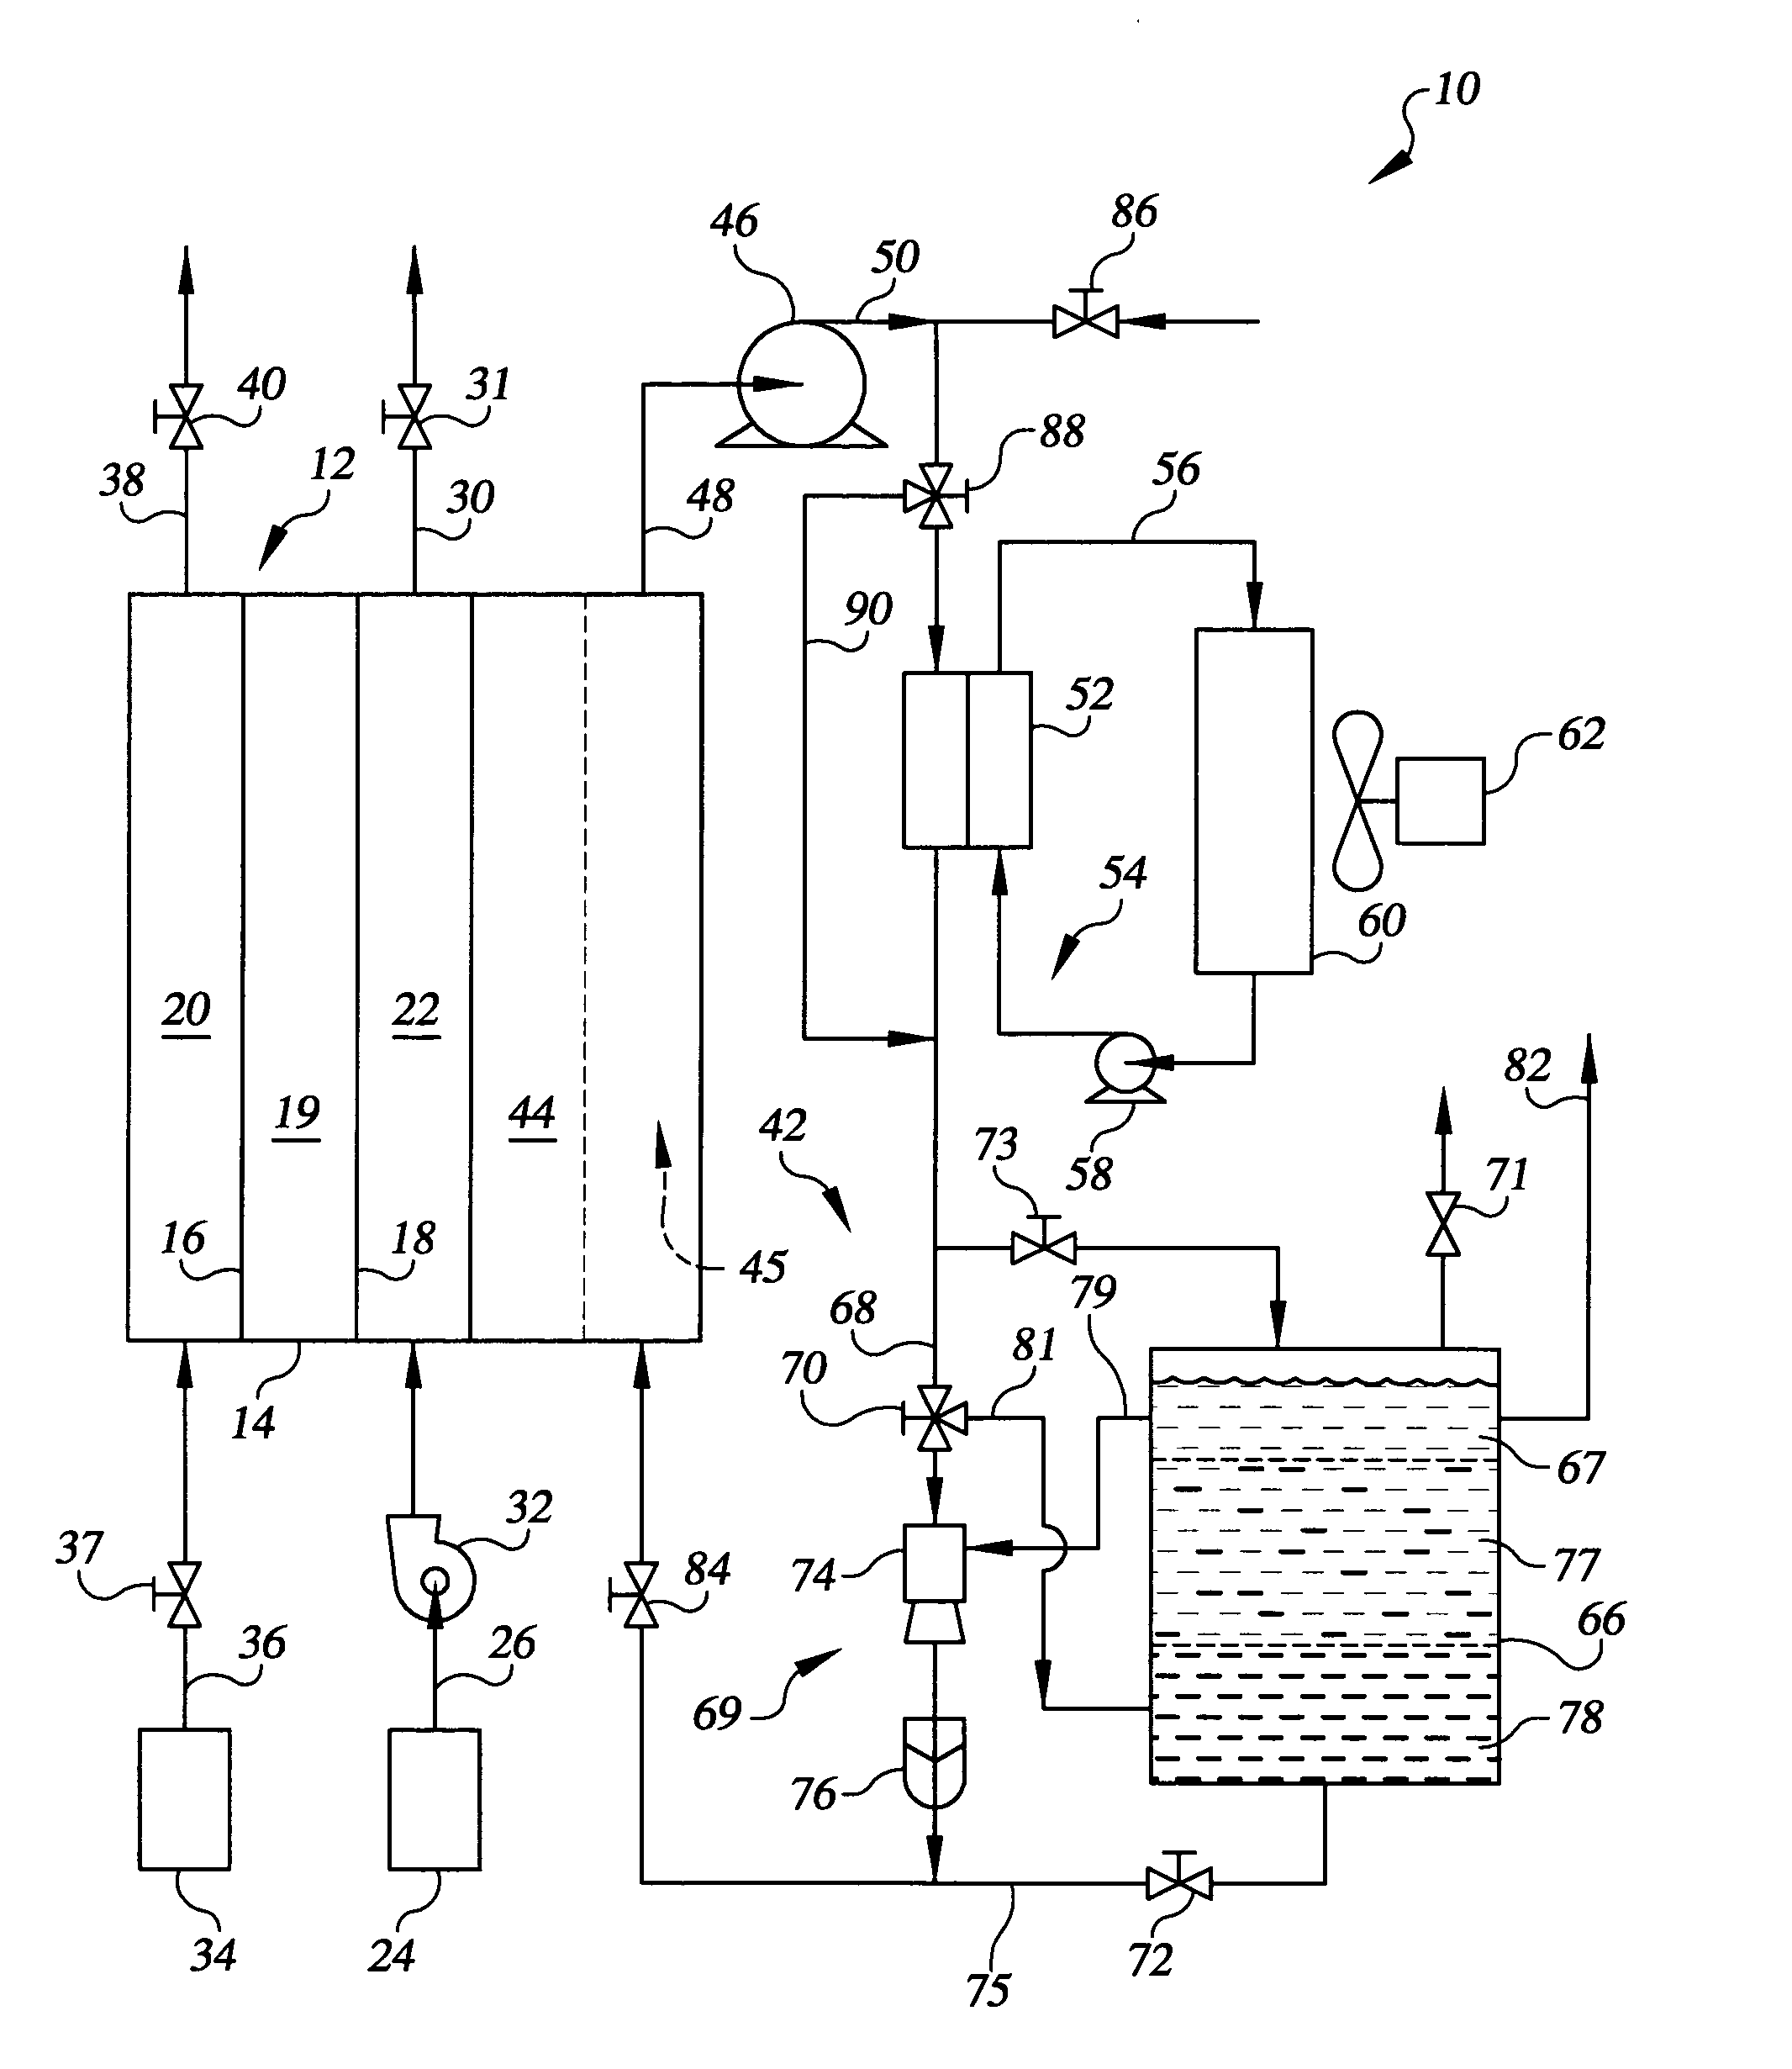 Freeze tolerant fuel cell power plant with a two-component mixed coolant